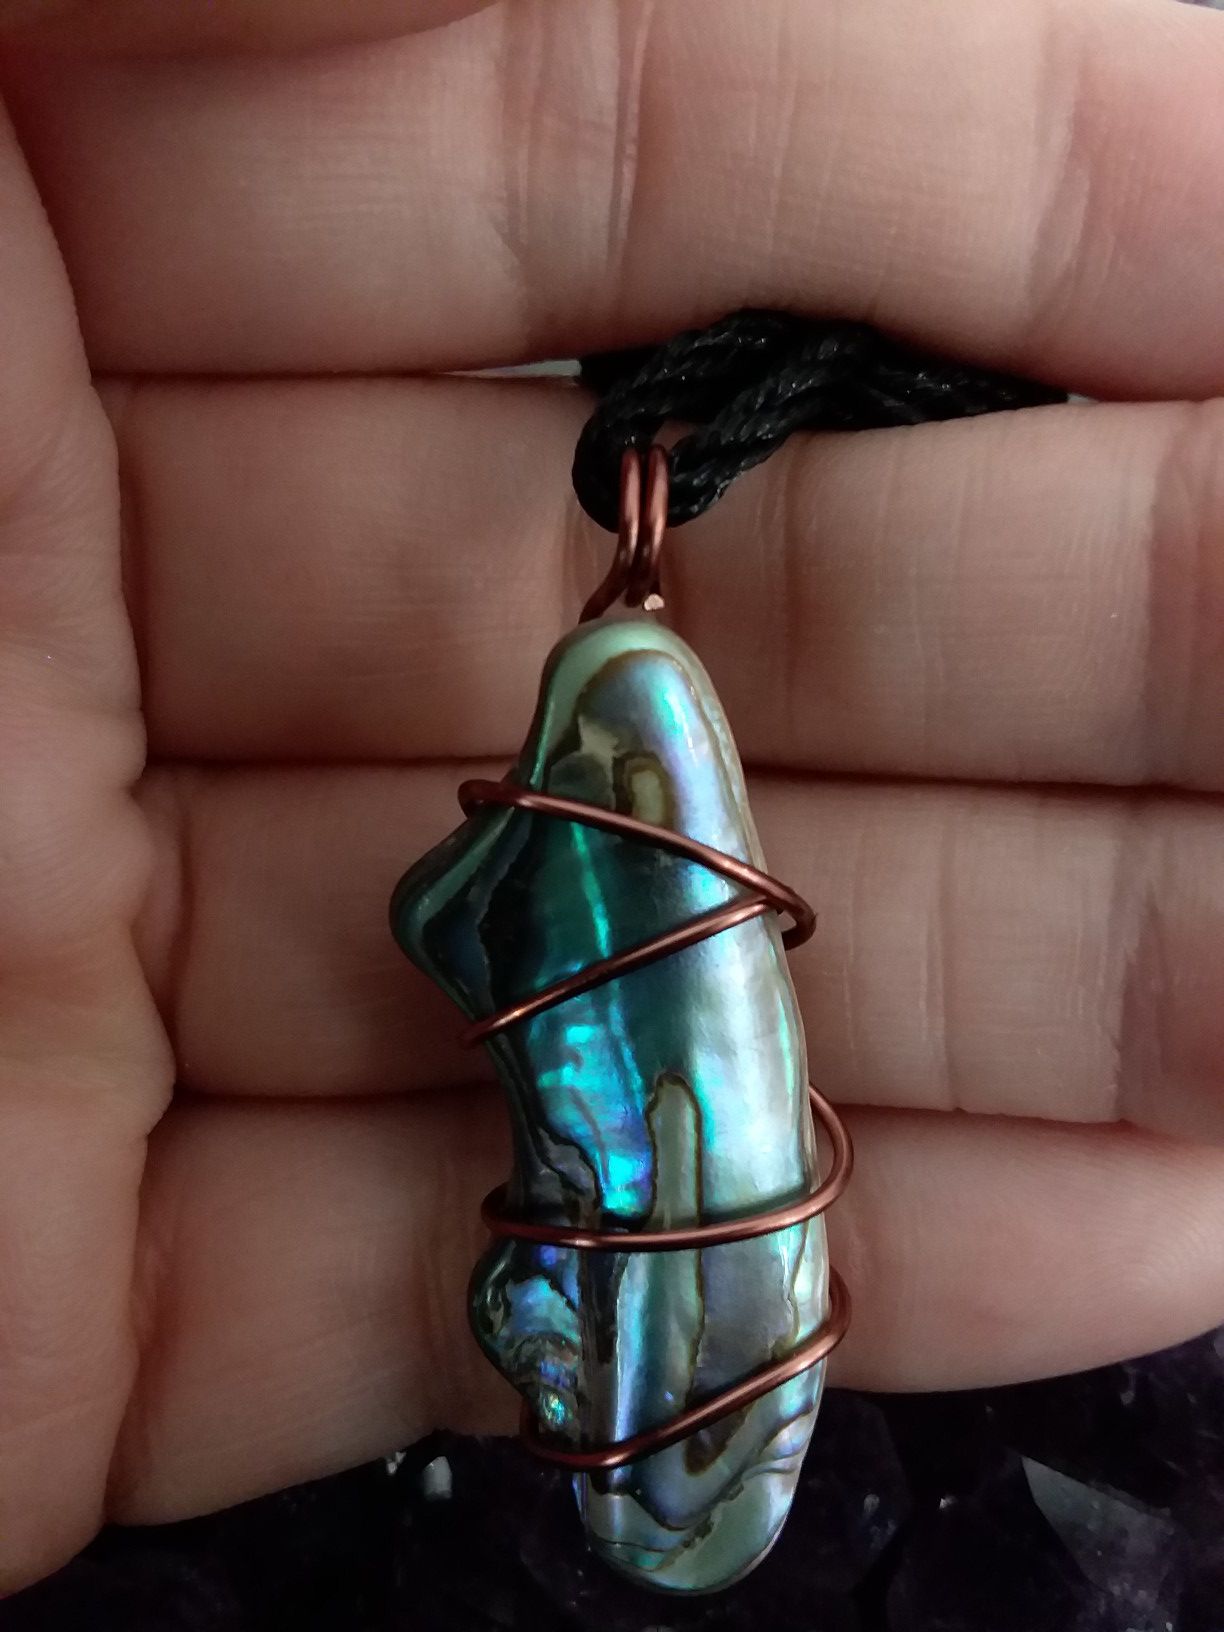 BRAND NEW, Abalone Shell and Copper Necklace. Nickle and Lead Free. Comes with the Jewlery bag. Ready to give as a gift.